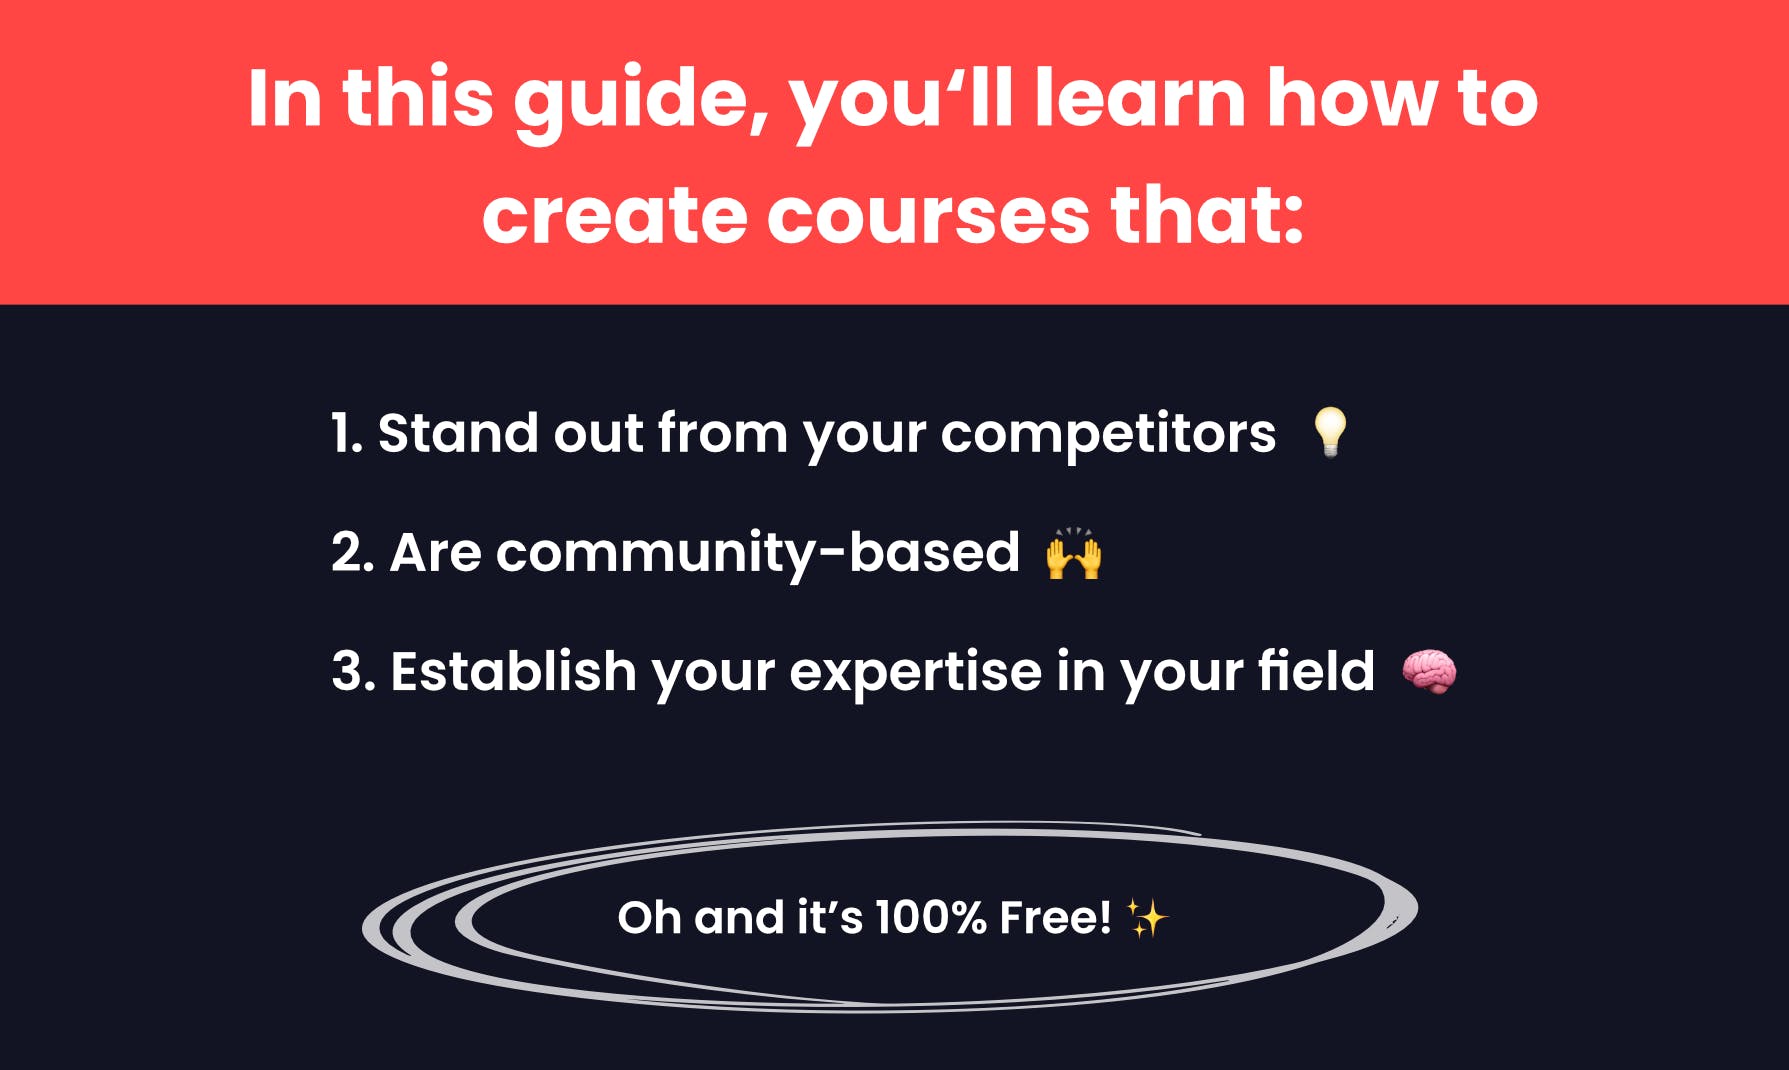 Free Guide: How to create online courses media 3